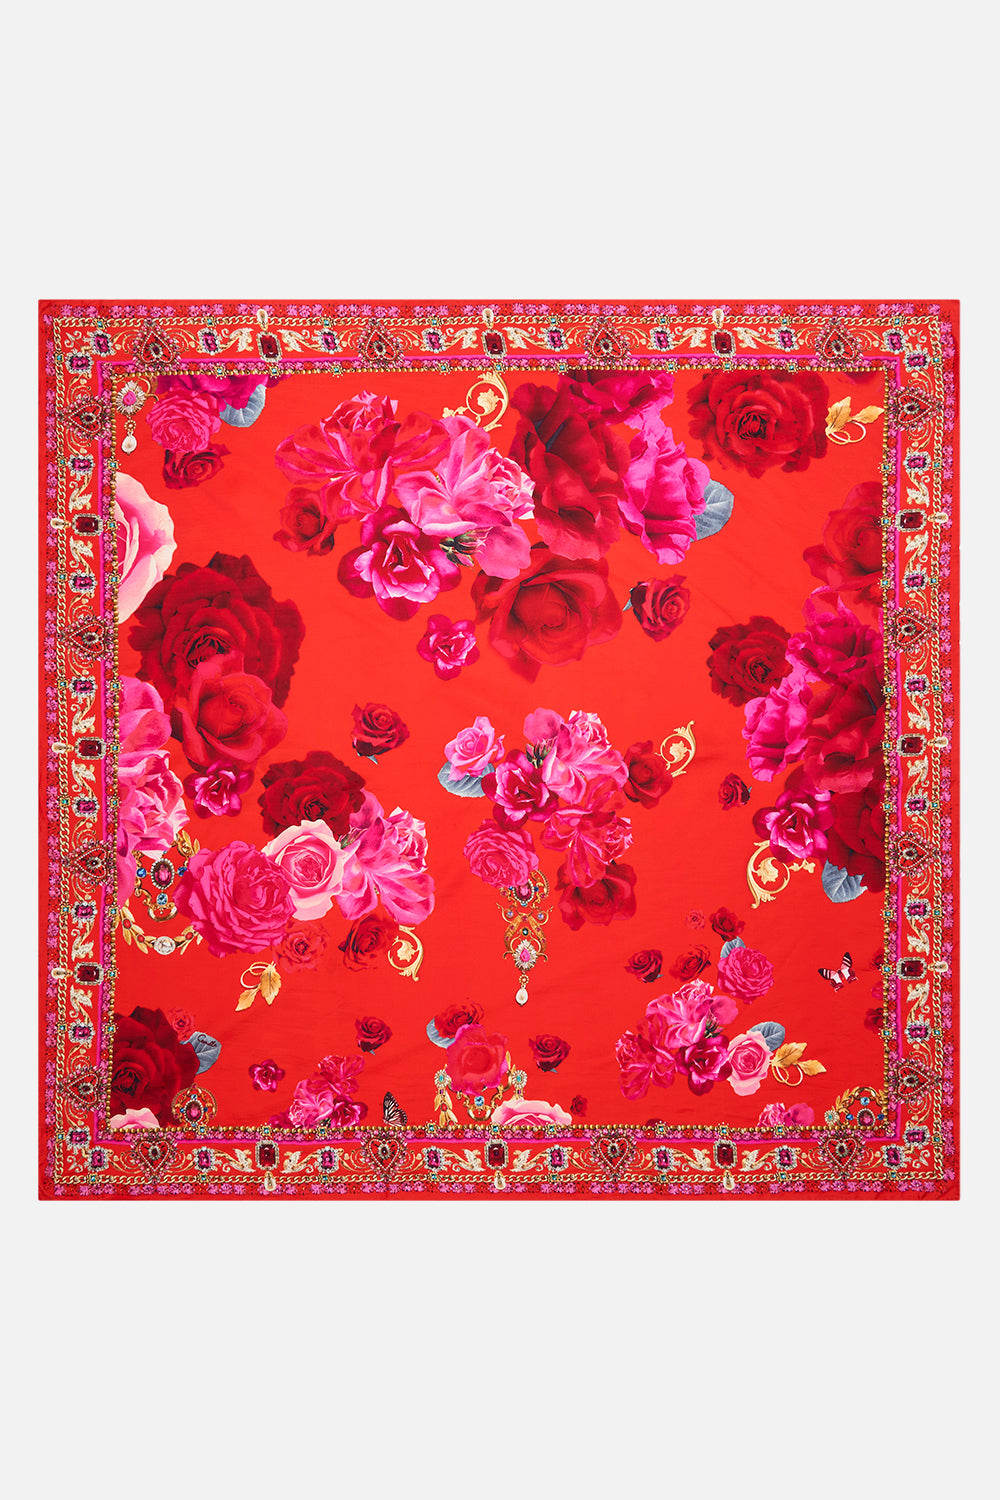 Product view of CAMILLA floral print silk scarf in Italian Rosa Print 